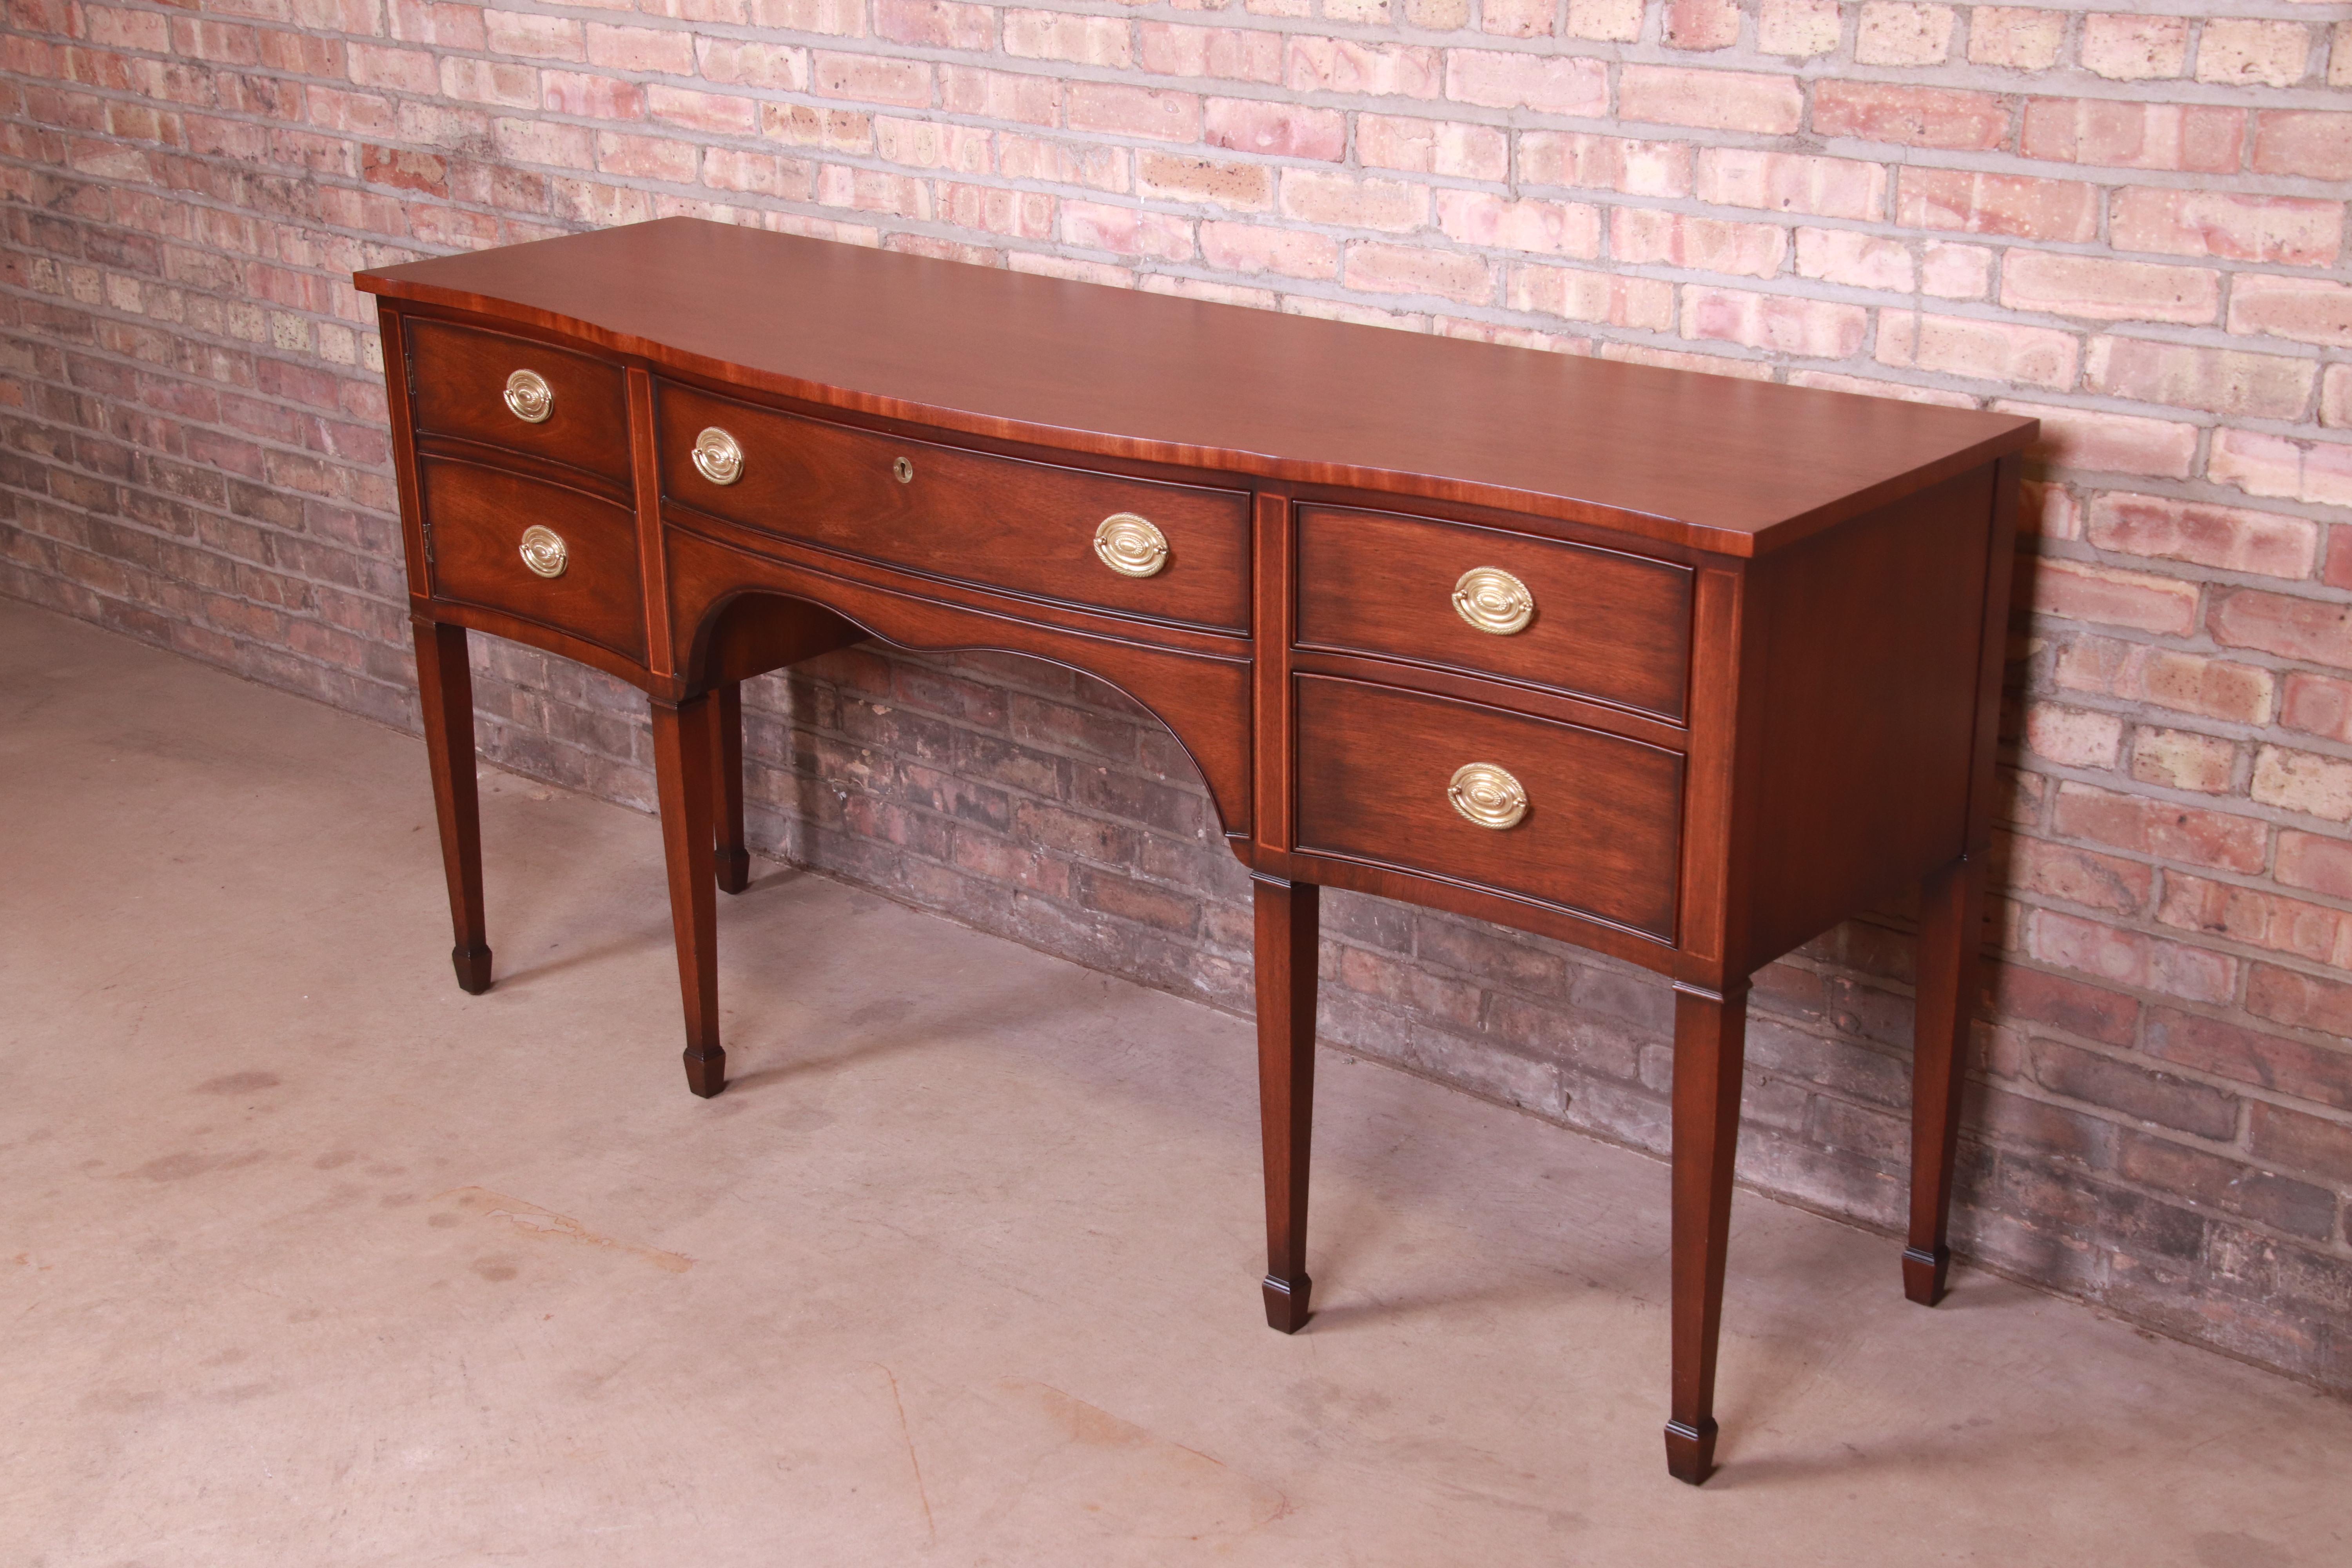 Kindel Furniture Hepplewhite Inlaid Mahogany Sideboard Credenza, Refinished In Good Condition For Sale In South Bend, IN